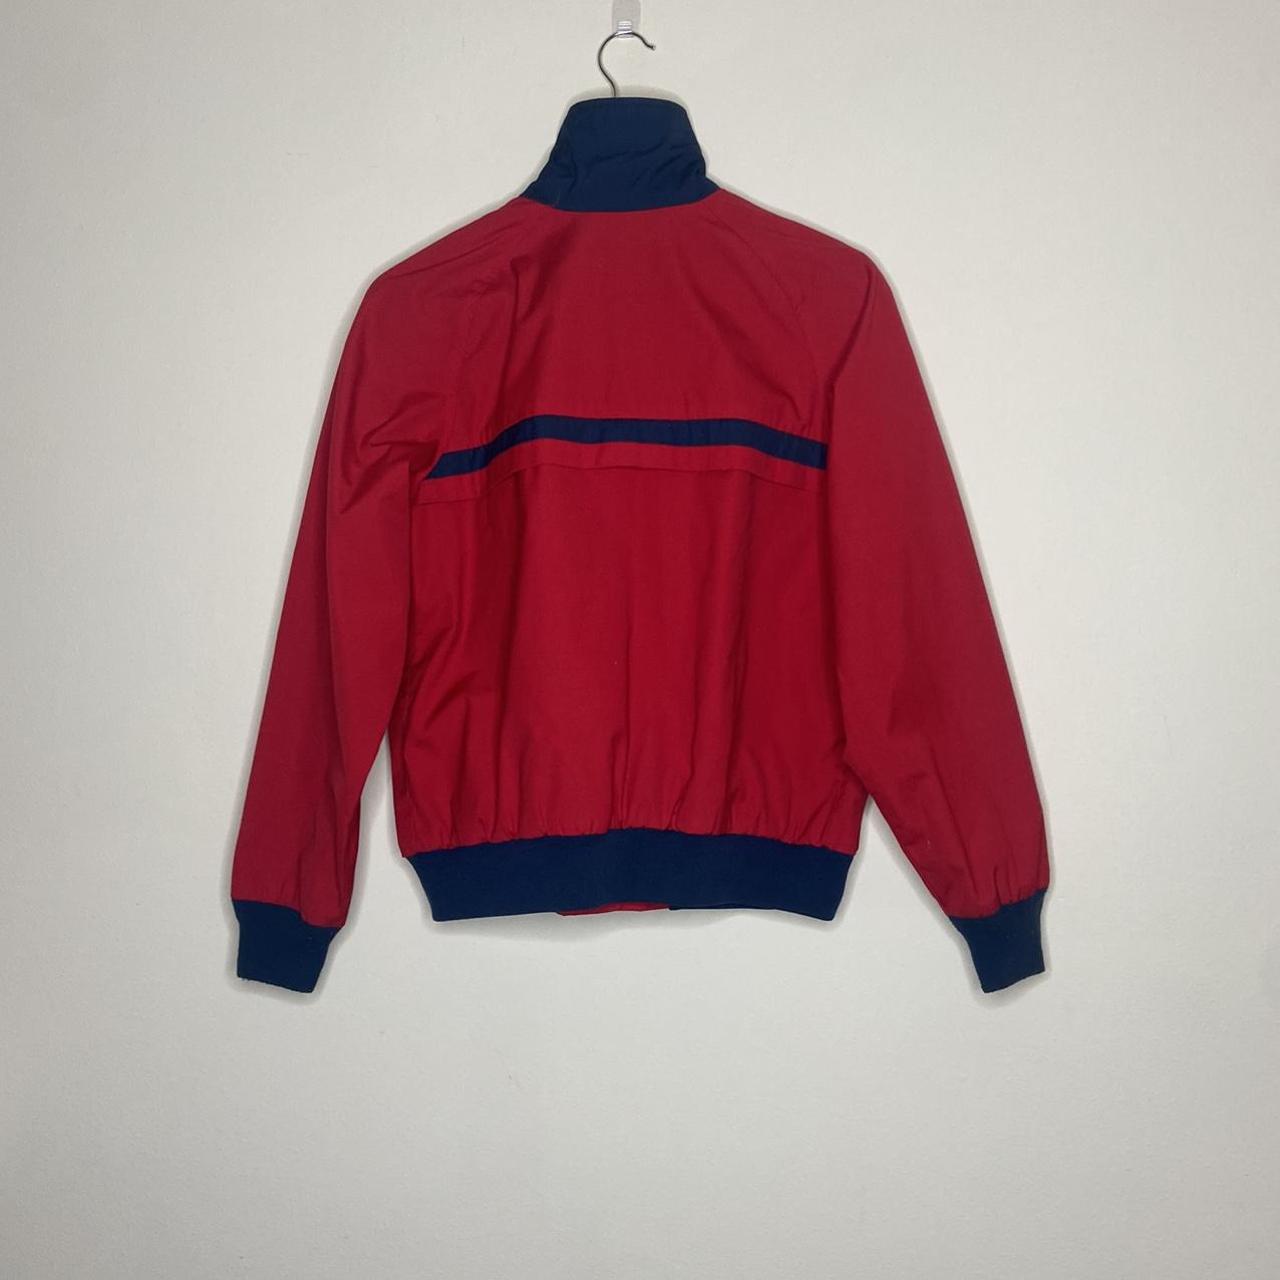 Woolrich Men's Red and Navy Jacket | Depop